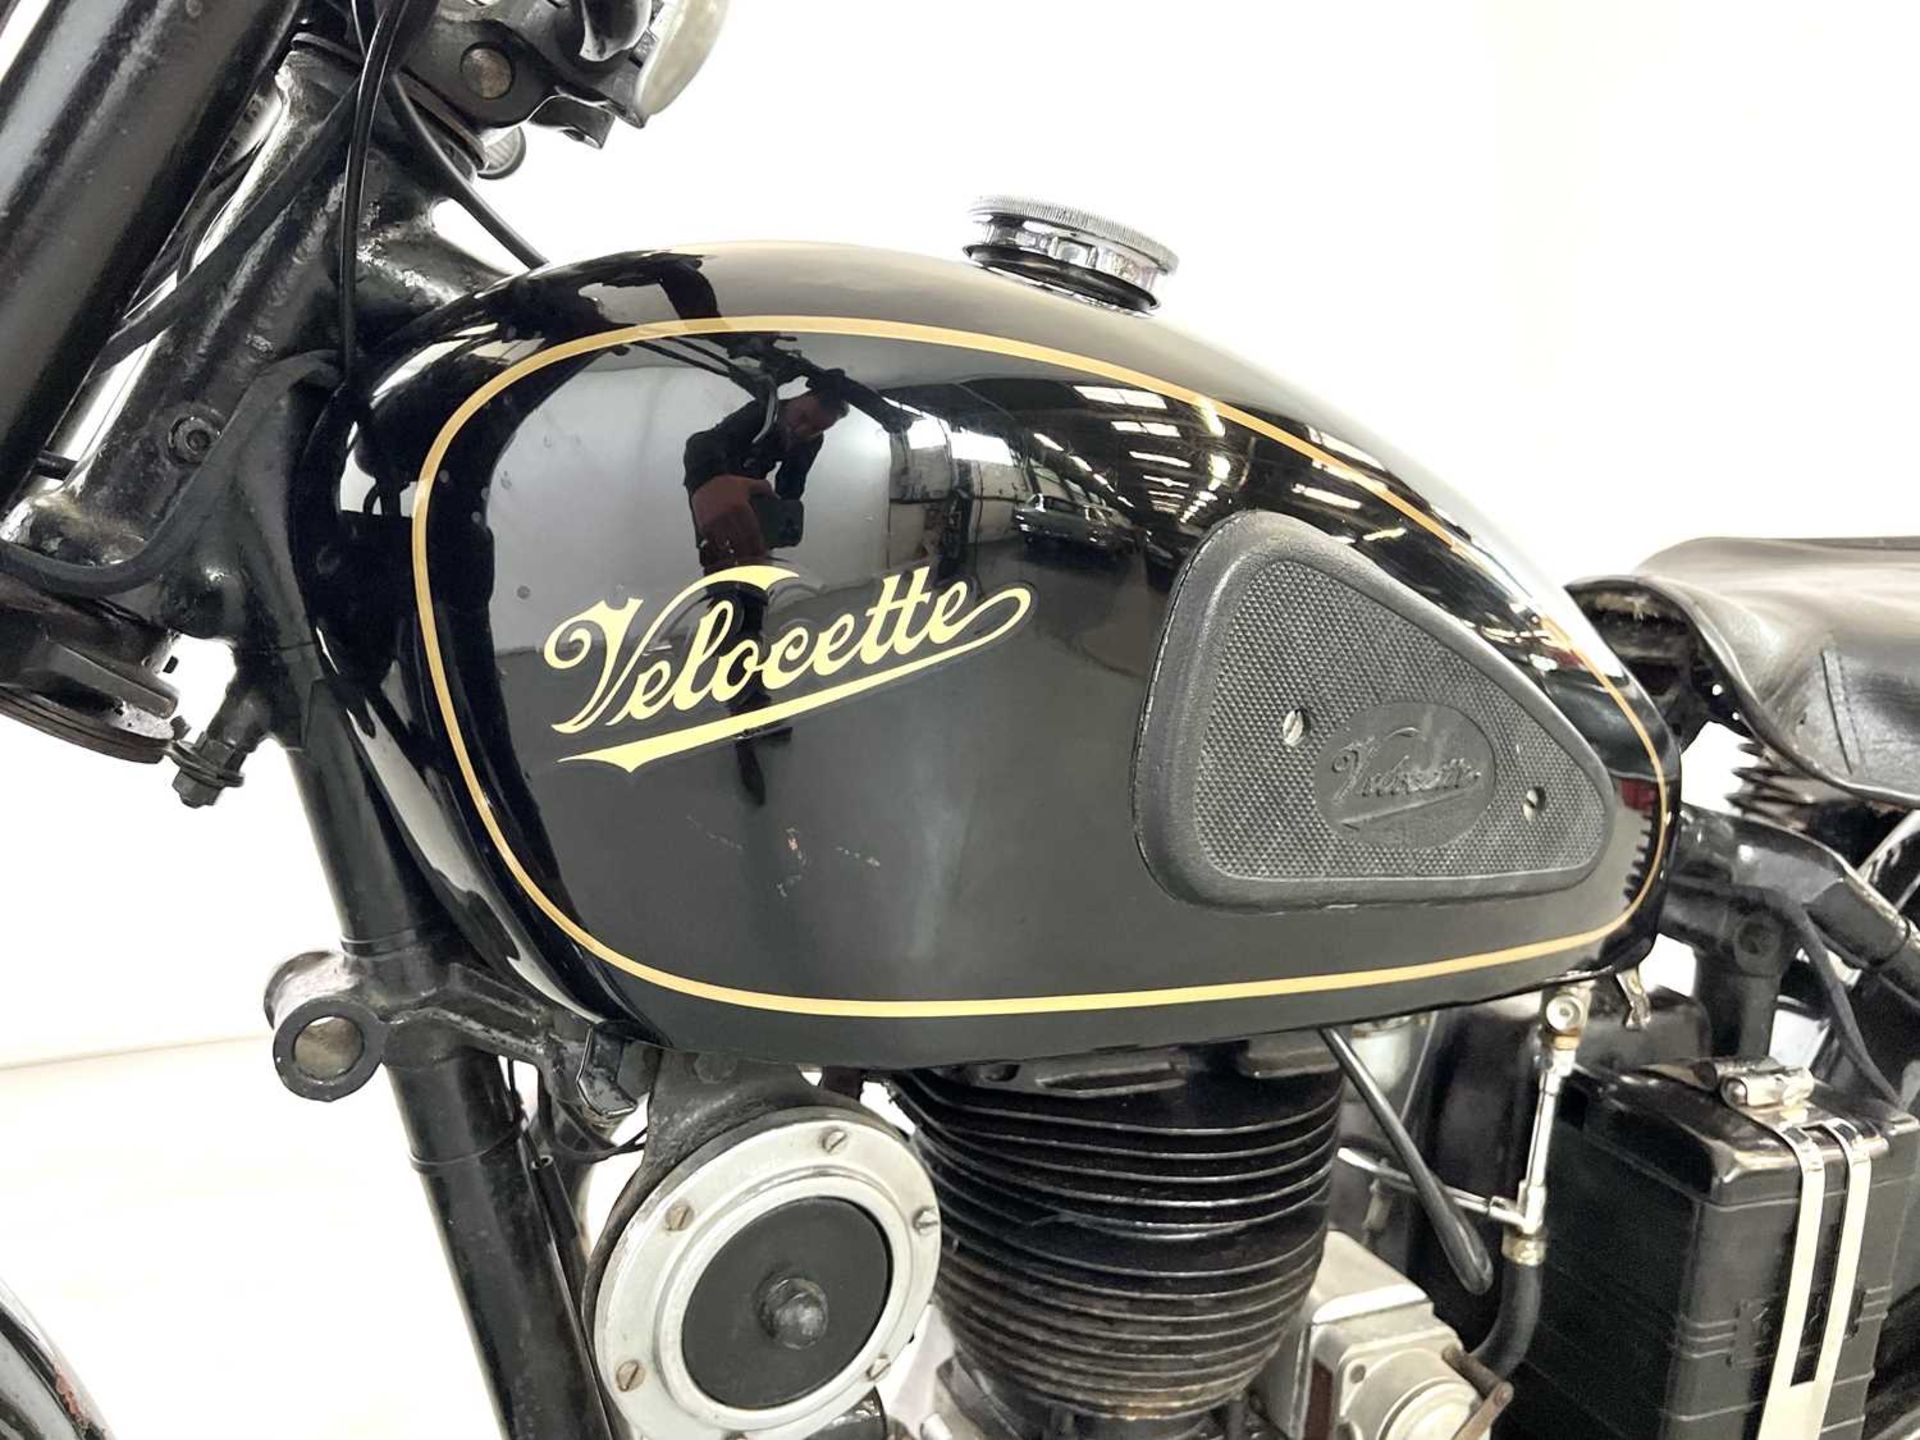 1948 Velocette MSS - Image 15 of 16